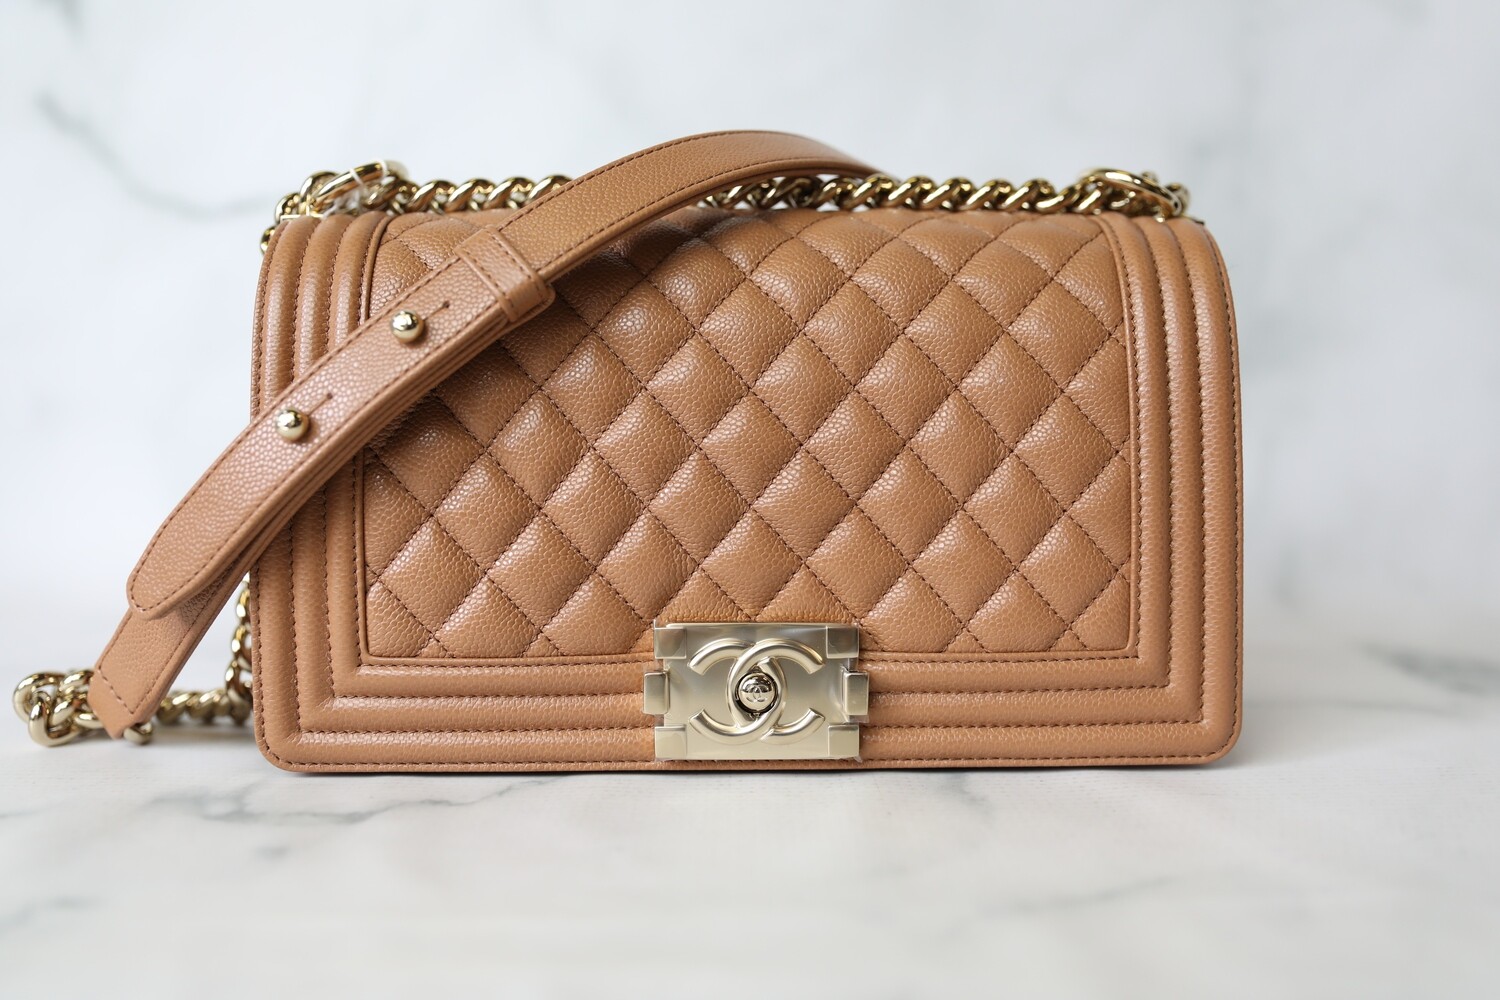 NEW WITH TAGS Chanel Small Boy Bag CAMEL CARAMEL Caviar With Gold Hardware